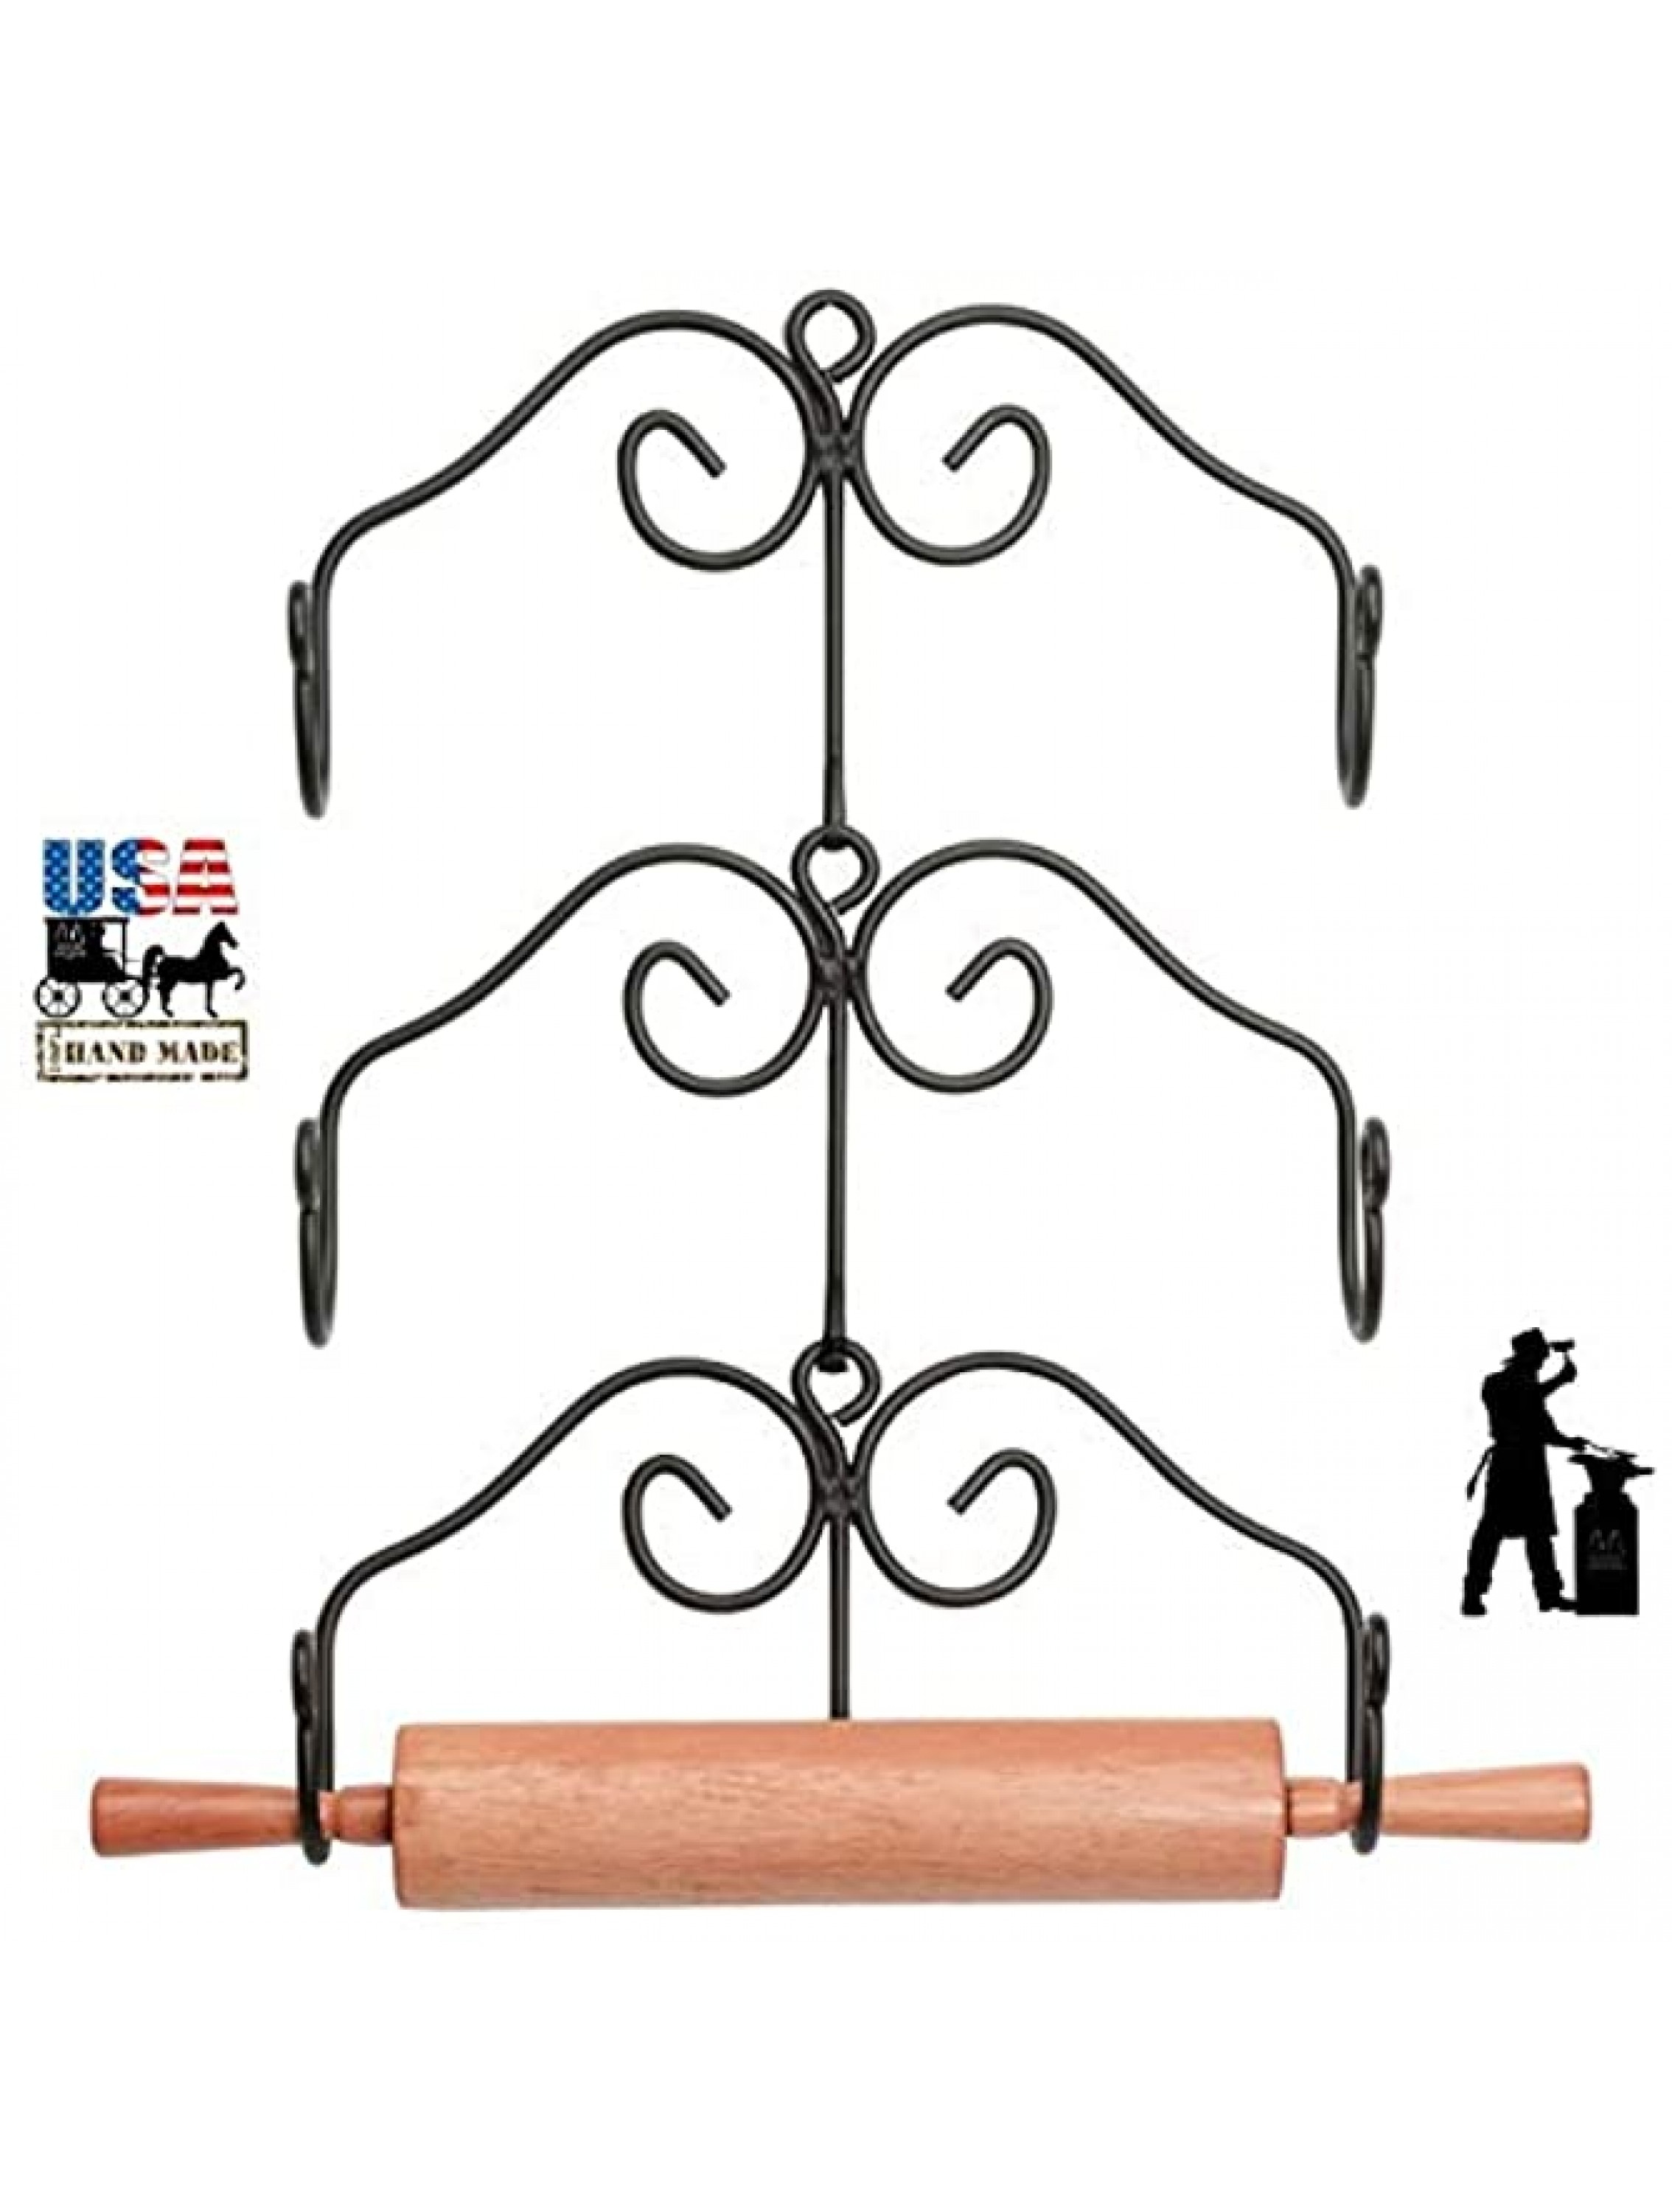 3 ROLLING PIN RACK SET Three Hand Forged Heavy Duty Wrought Iron Racks Amish Blacksmith Handcrafted & Made in the USA - BKIK70279